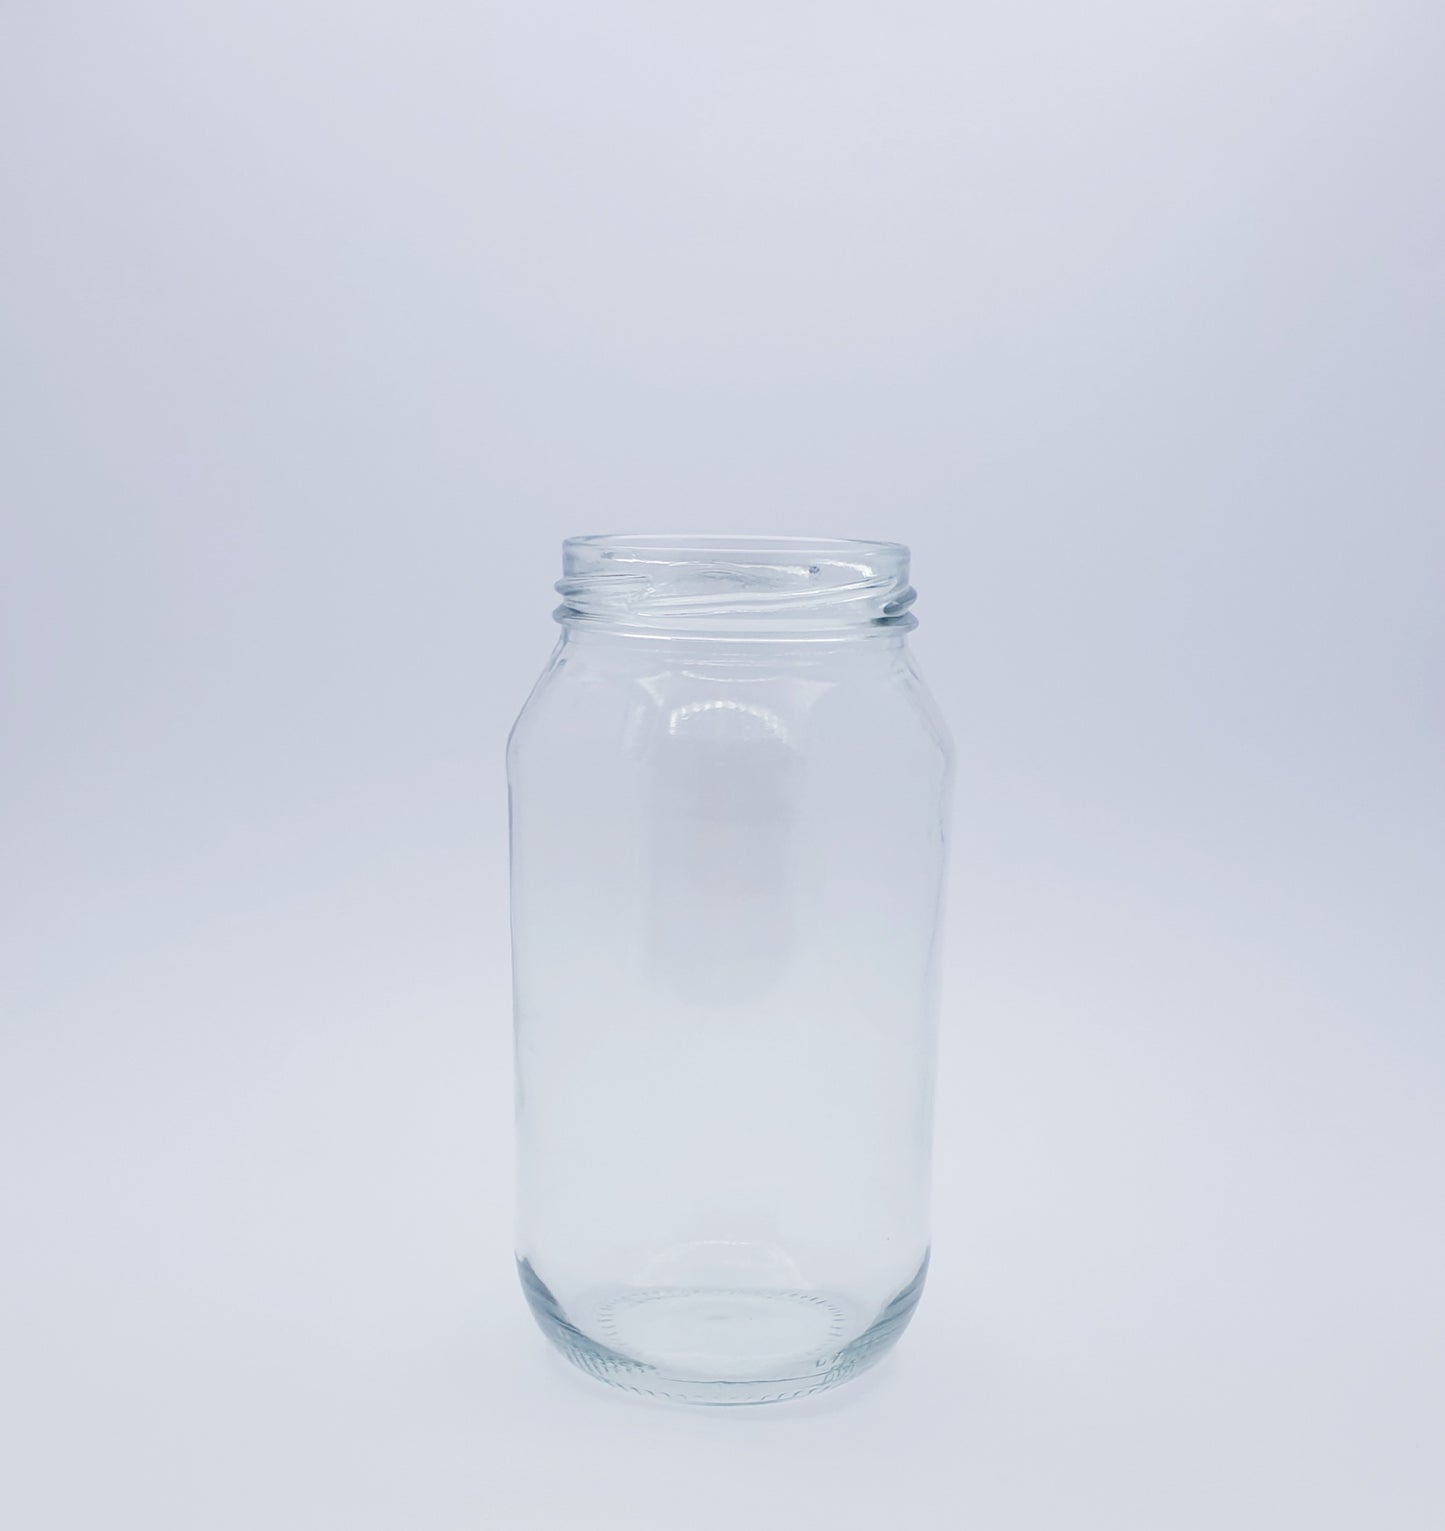 500ml(700gm) Round Clear Glass Jar without a lid.  This takes a 63mm Twist Cap